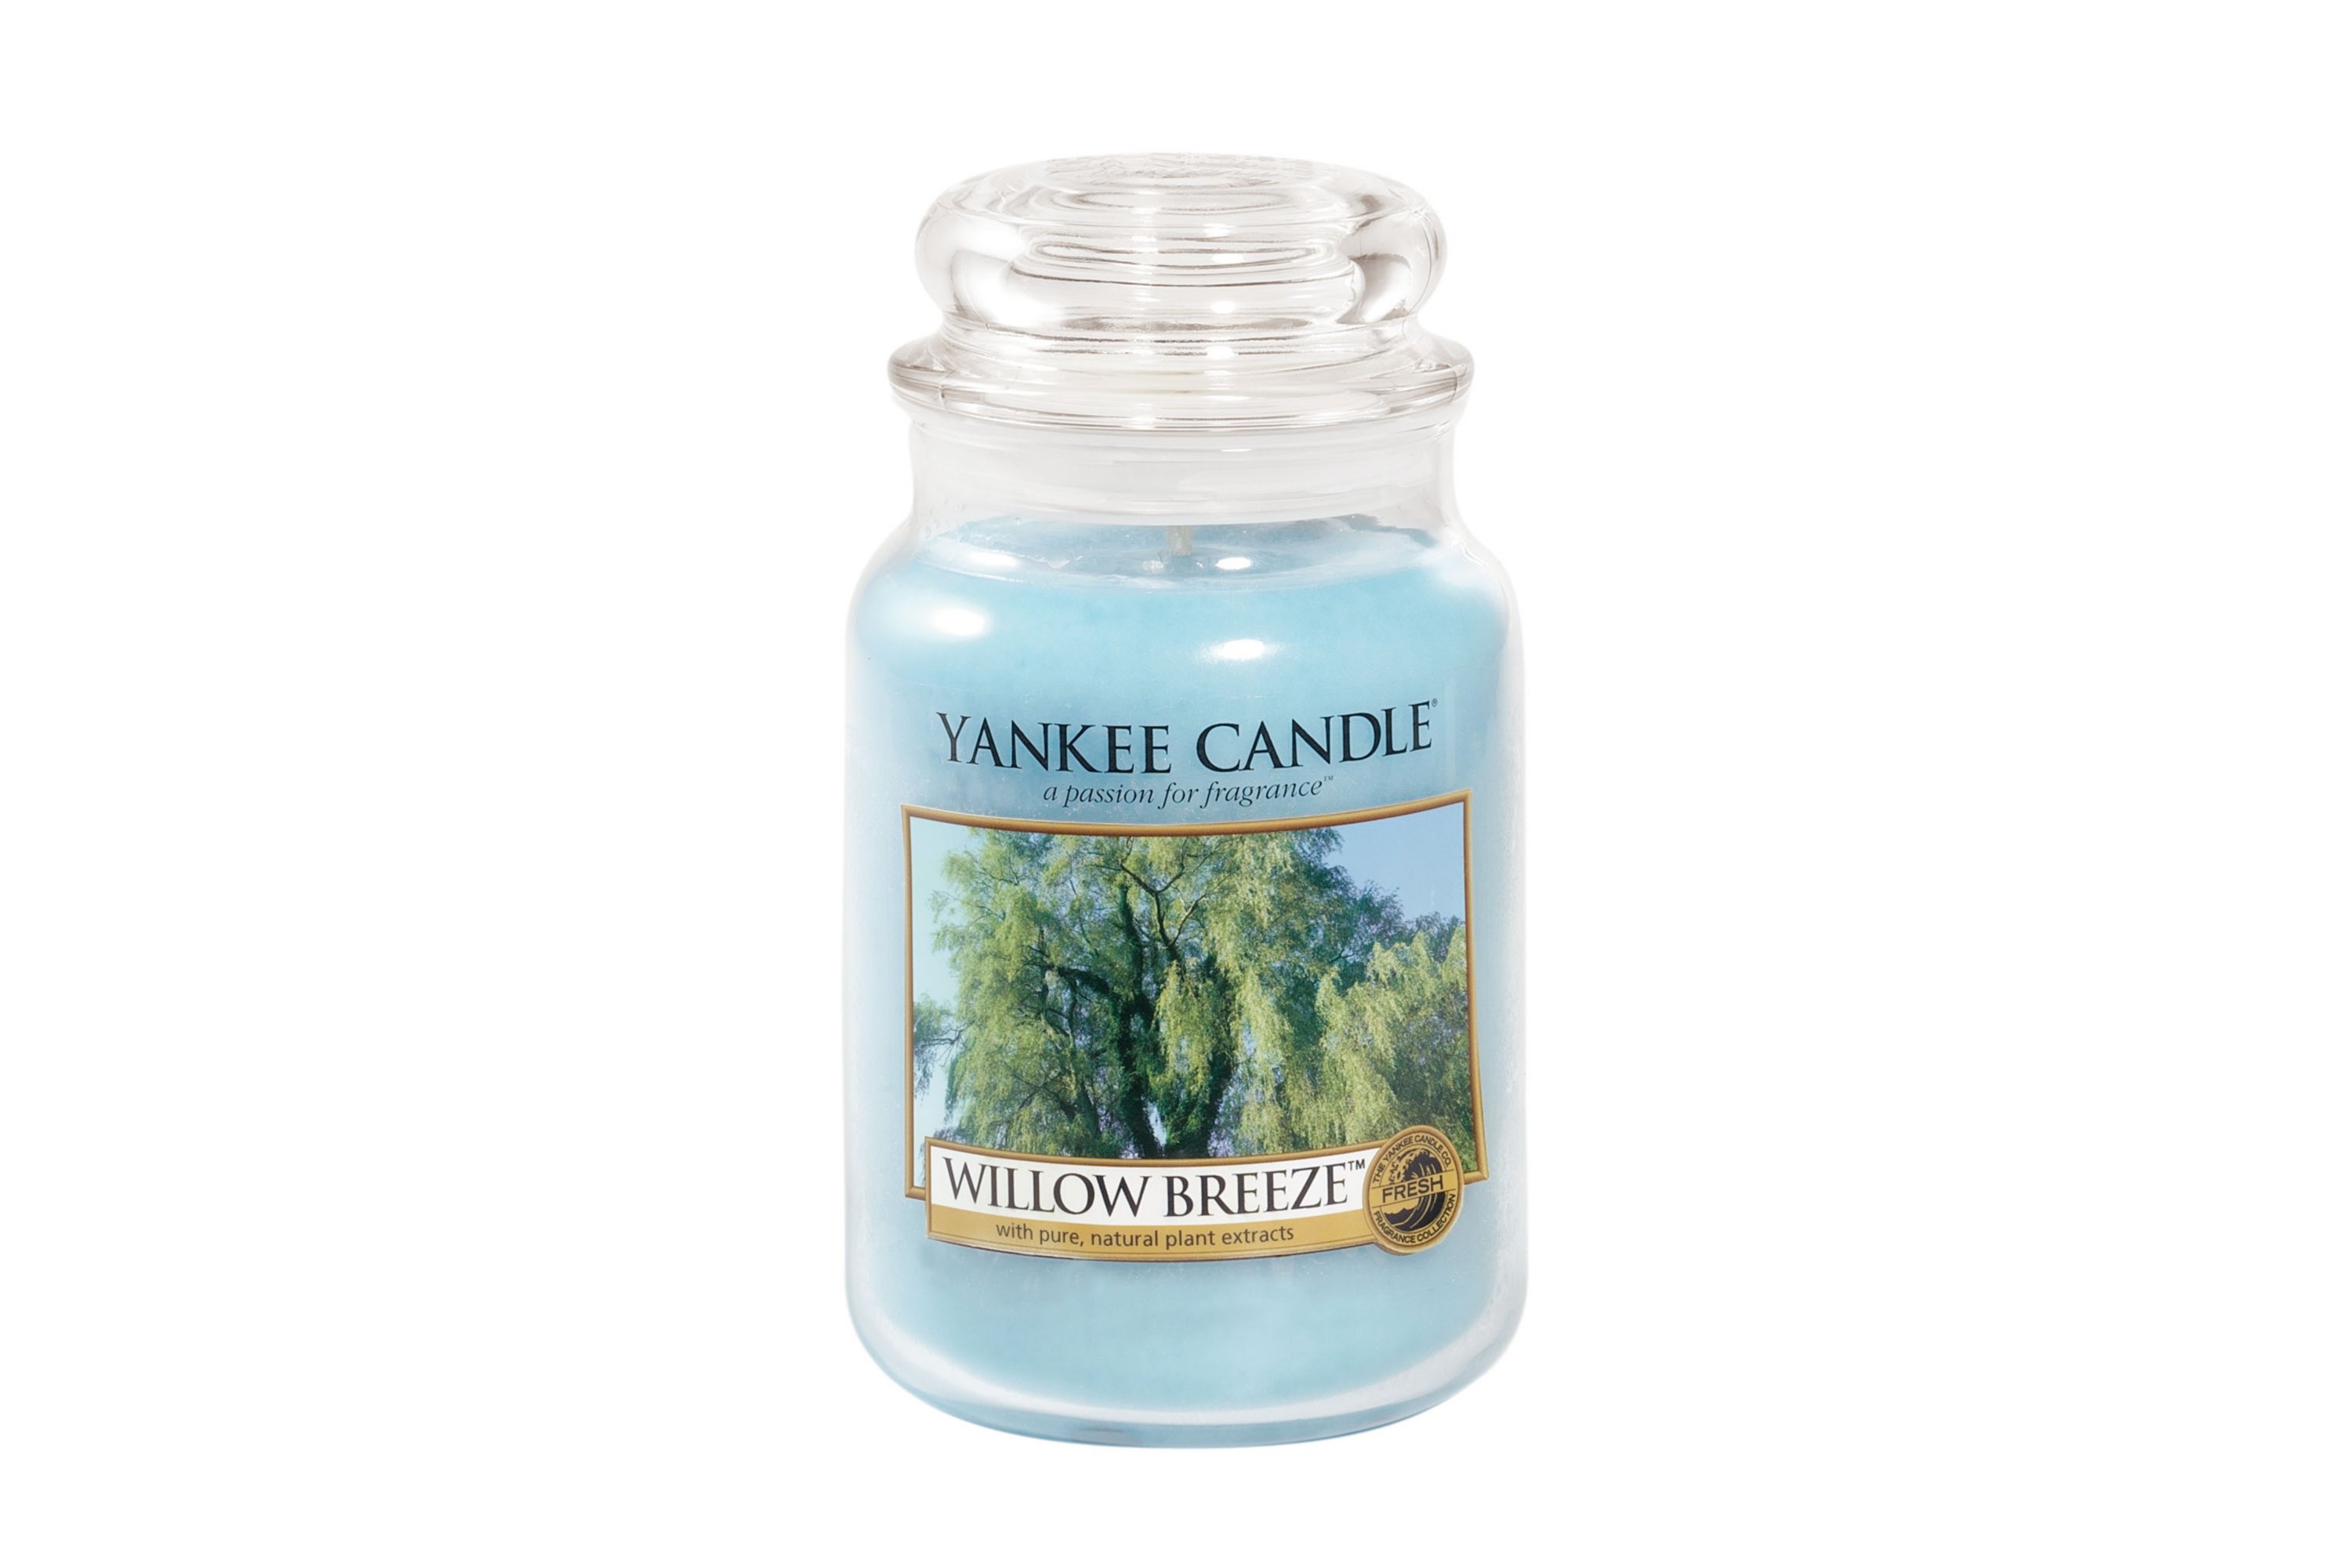 ☆☆WILLOW BREEZE☆☆ LARGE YANKEE CANDLE JAR☆☆FRESH SCENT FREE FAST SHIPPING 